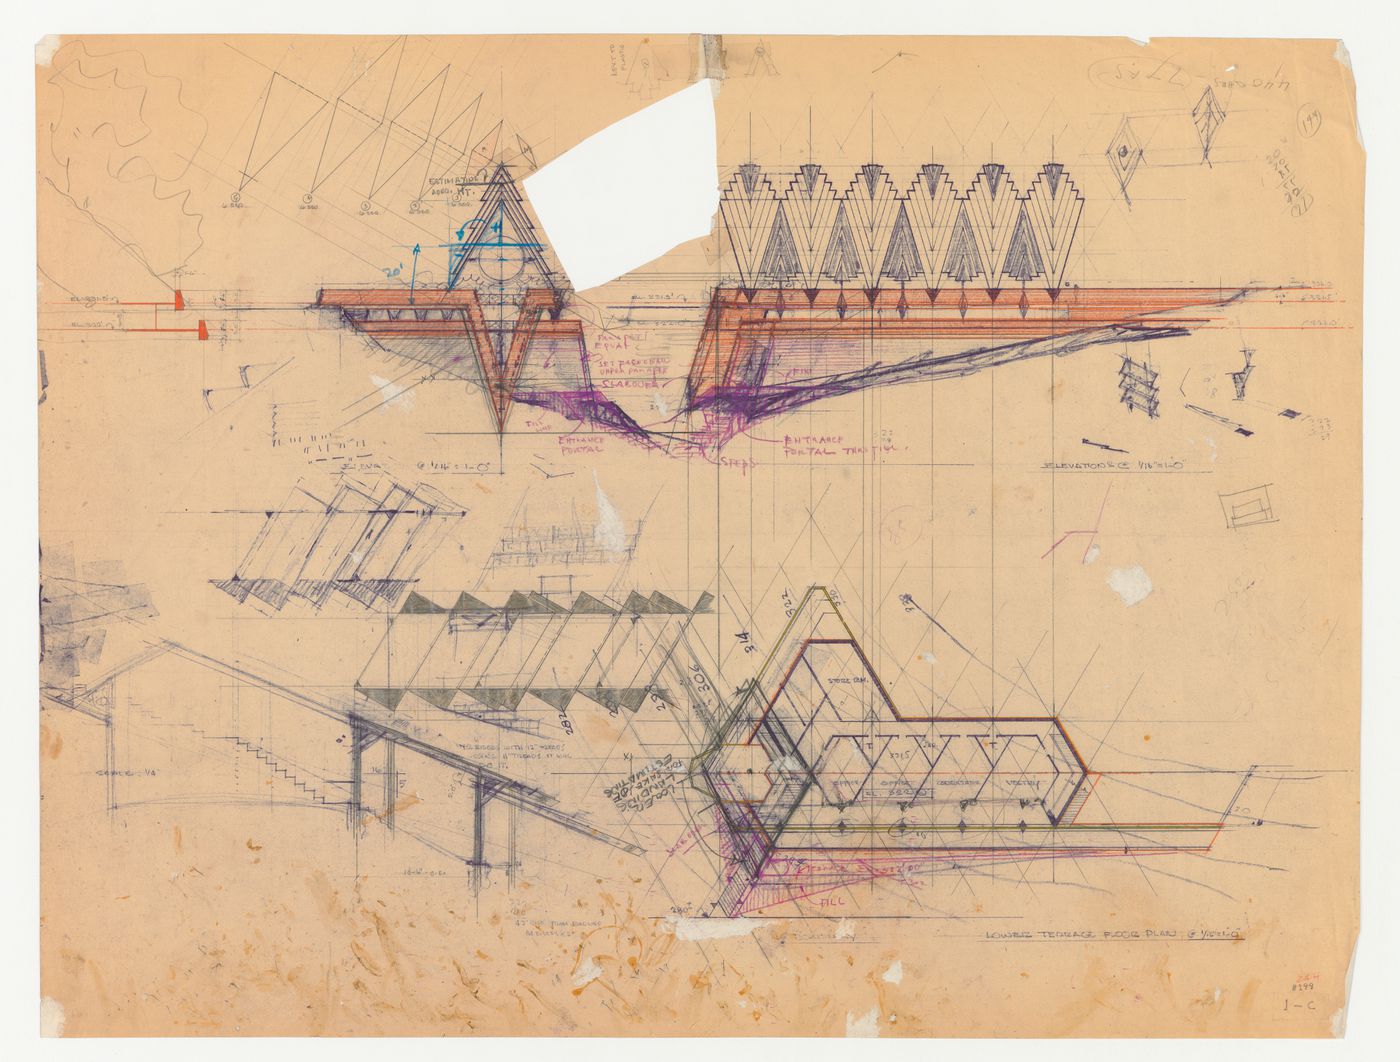 Swedenborg Memorial Chapel, El Cerrito, California: Elevations, plans, and section for the chapel and covered walkway